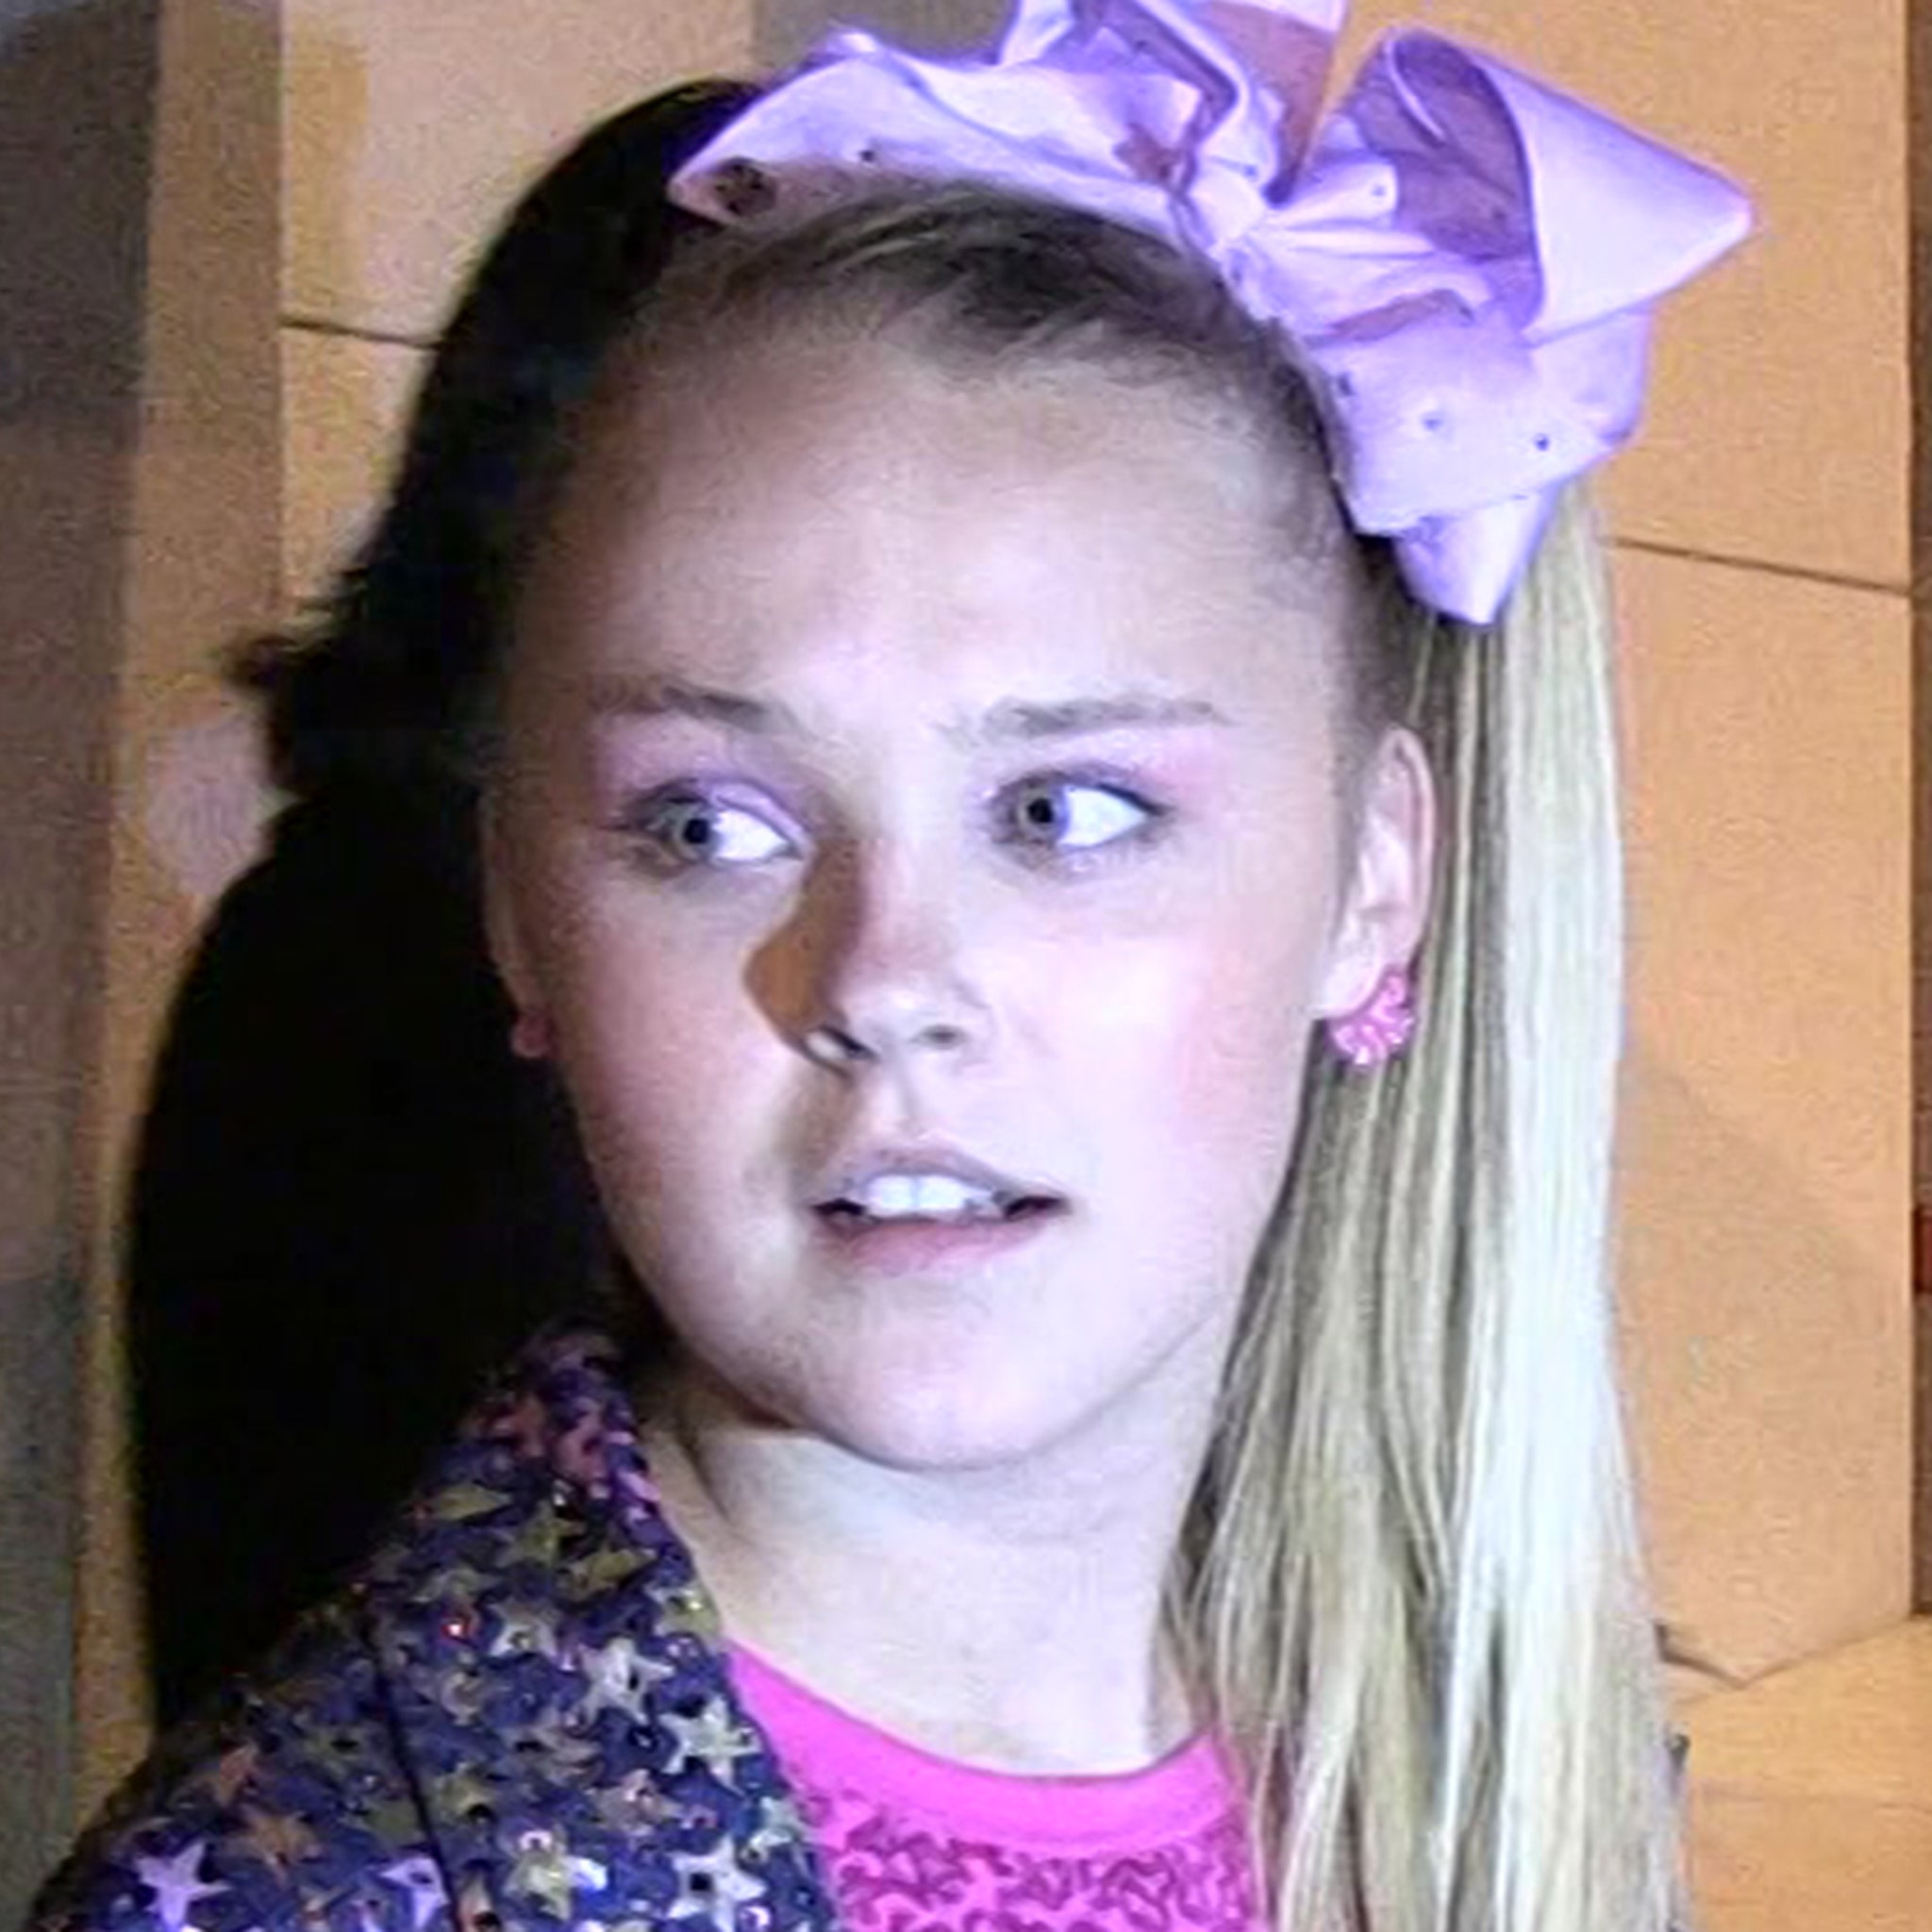 JoJo Siwa Relates To Britney Spears With “Hard” Experience As A Child Star